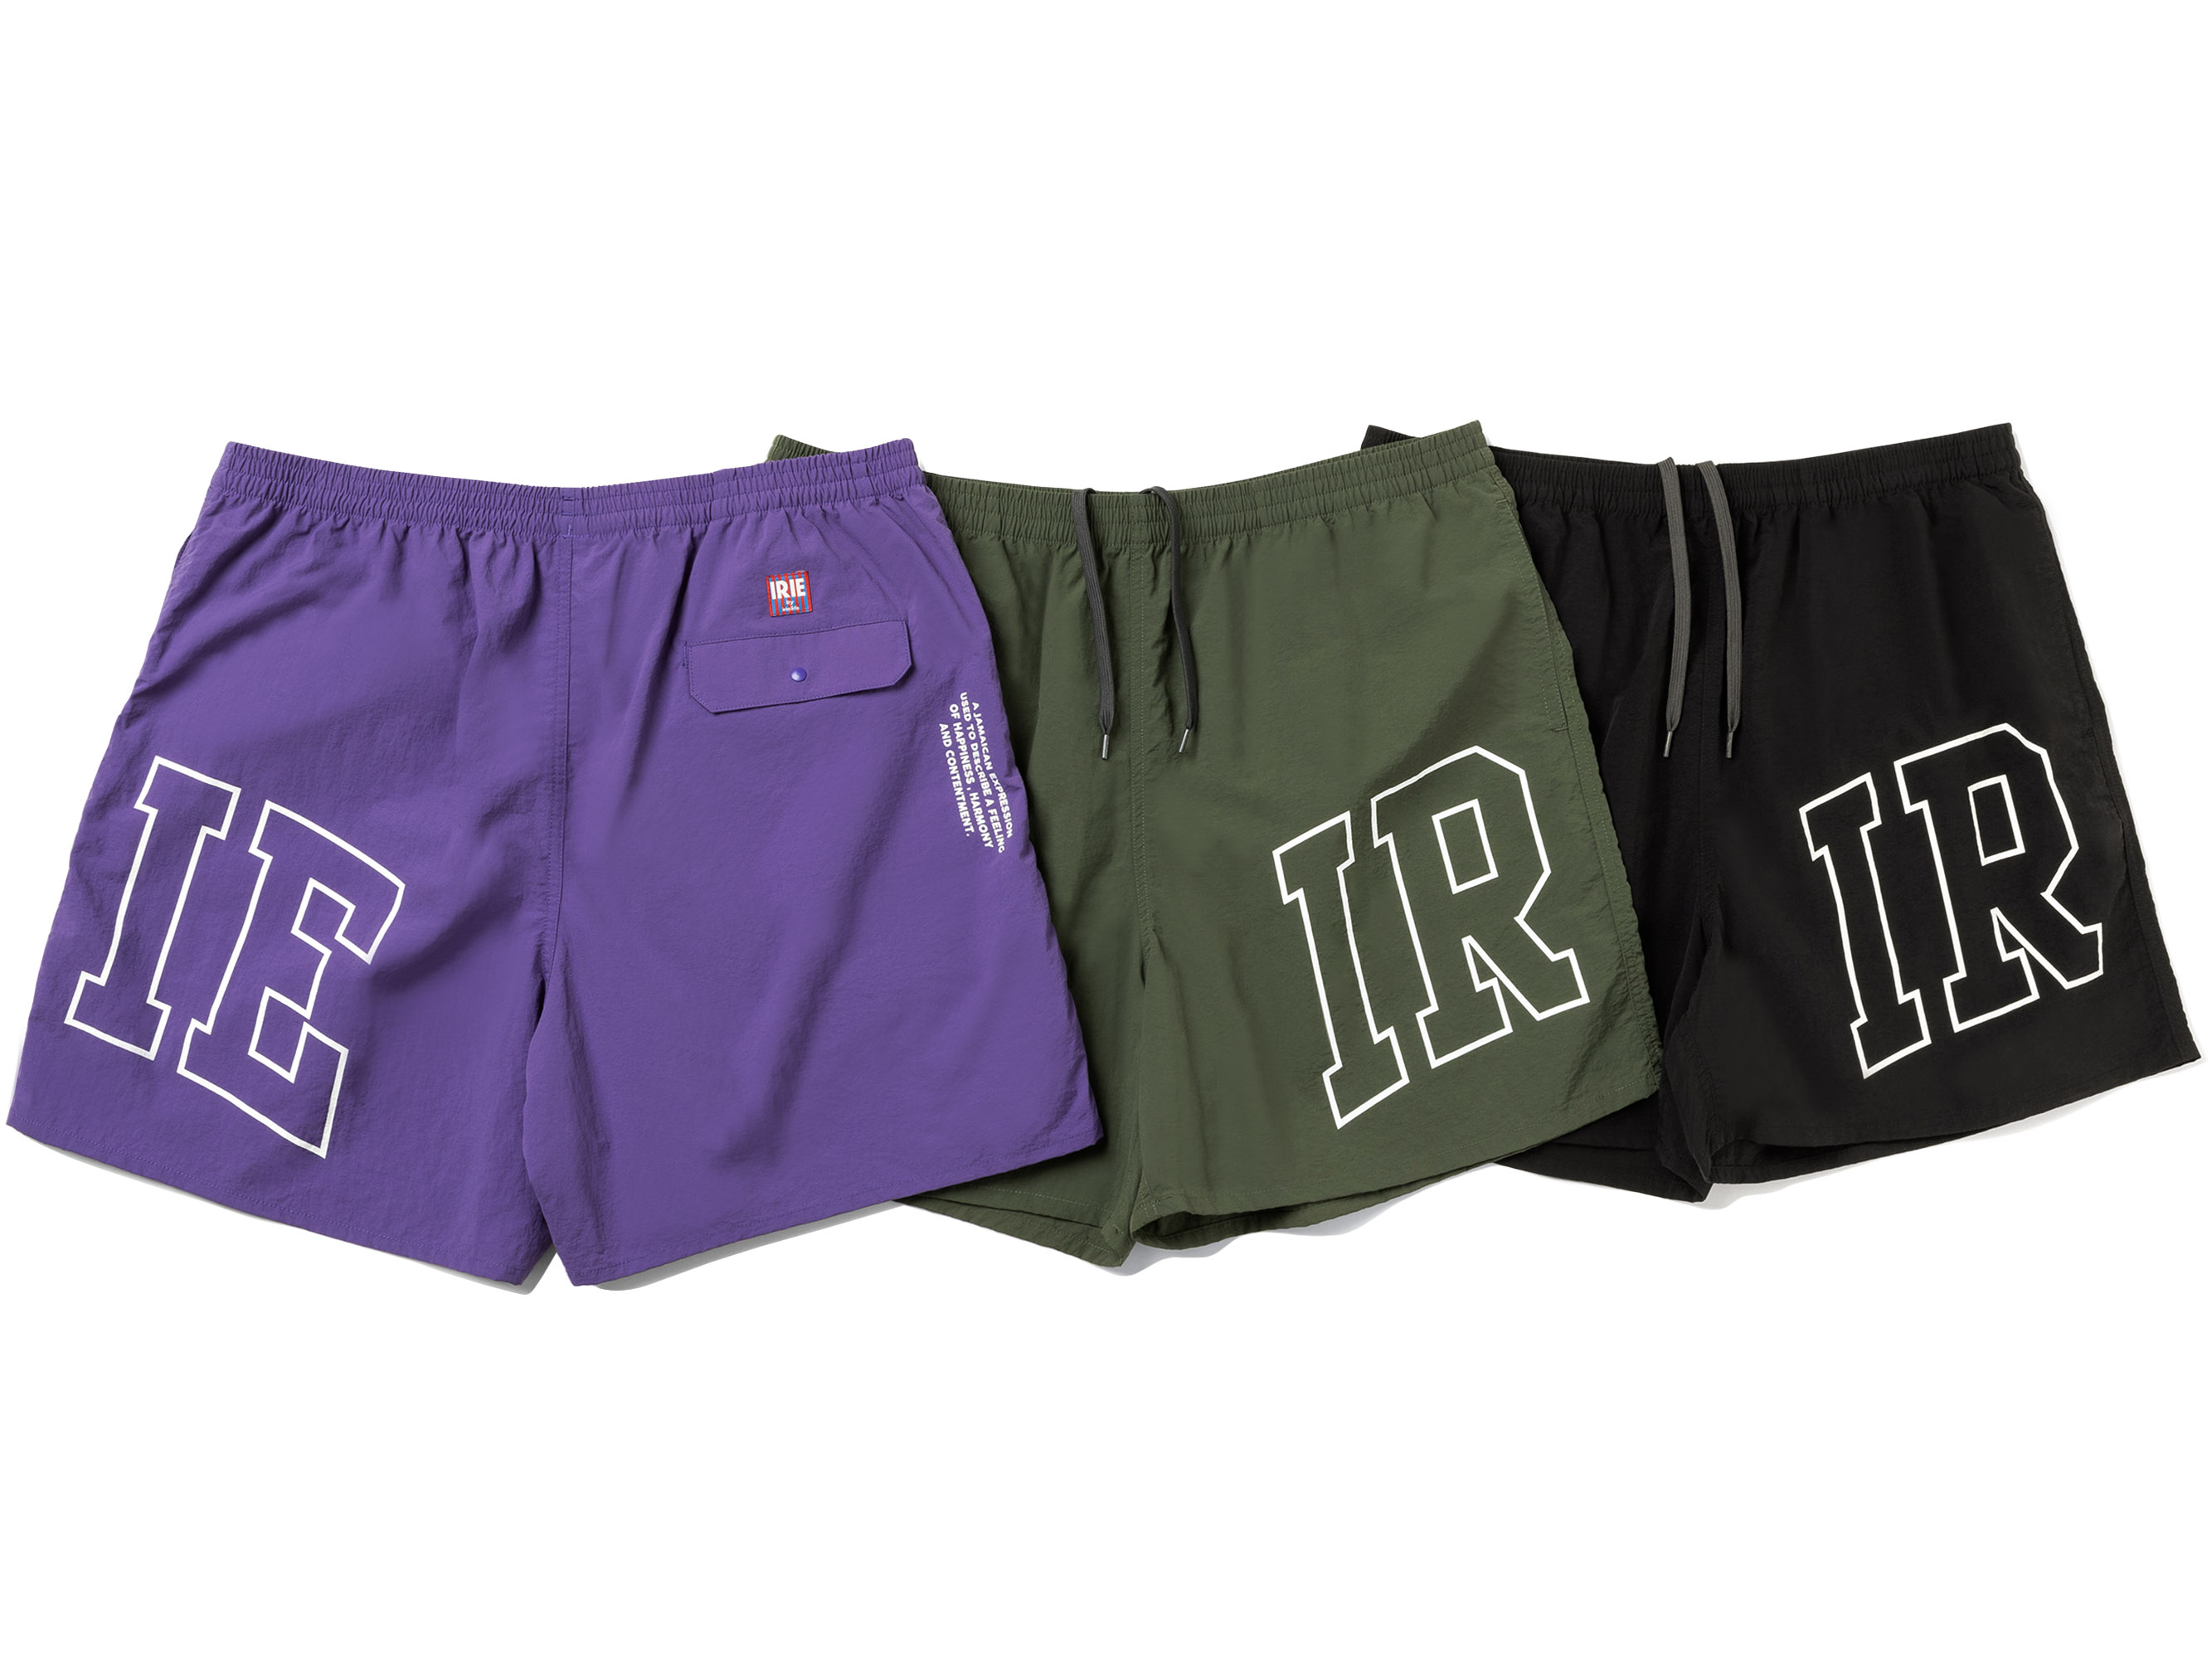 COLLEGE URBAN SHORTS - IRIE by irielife